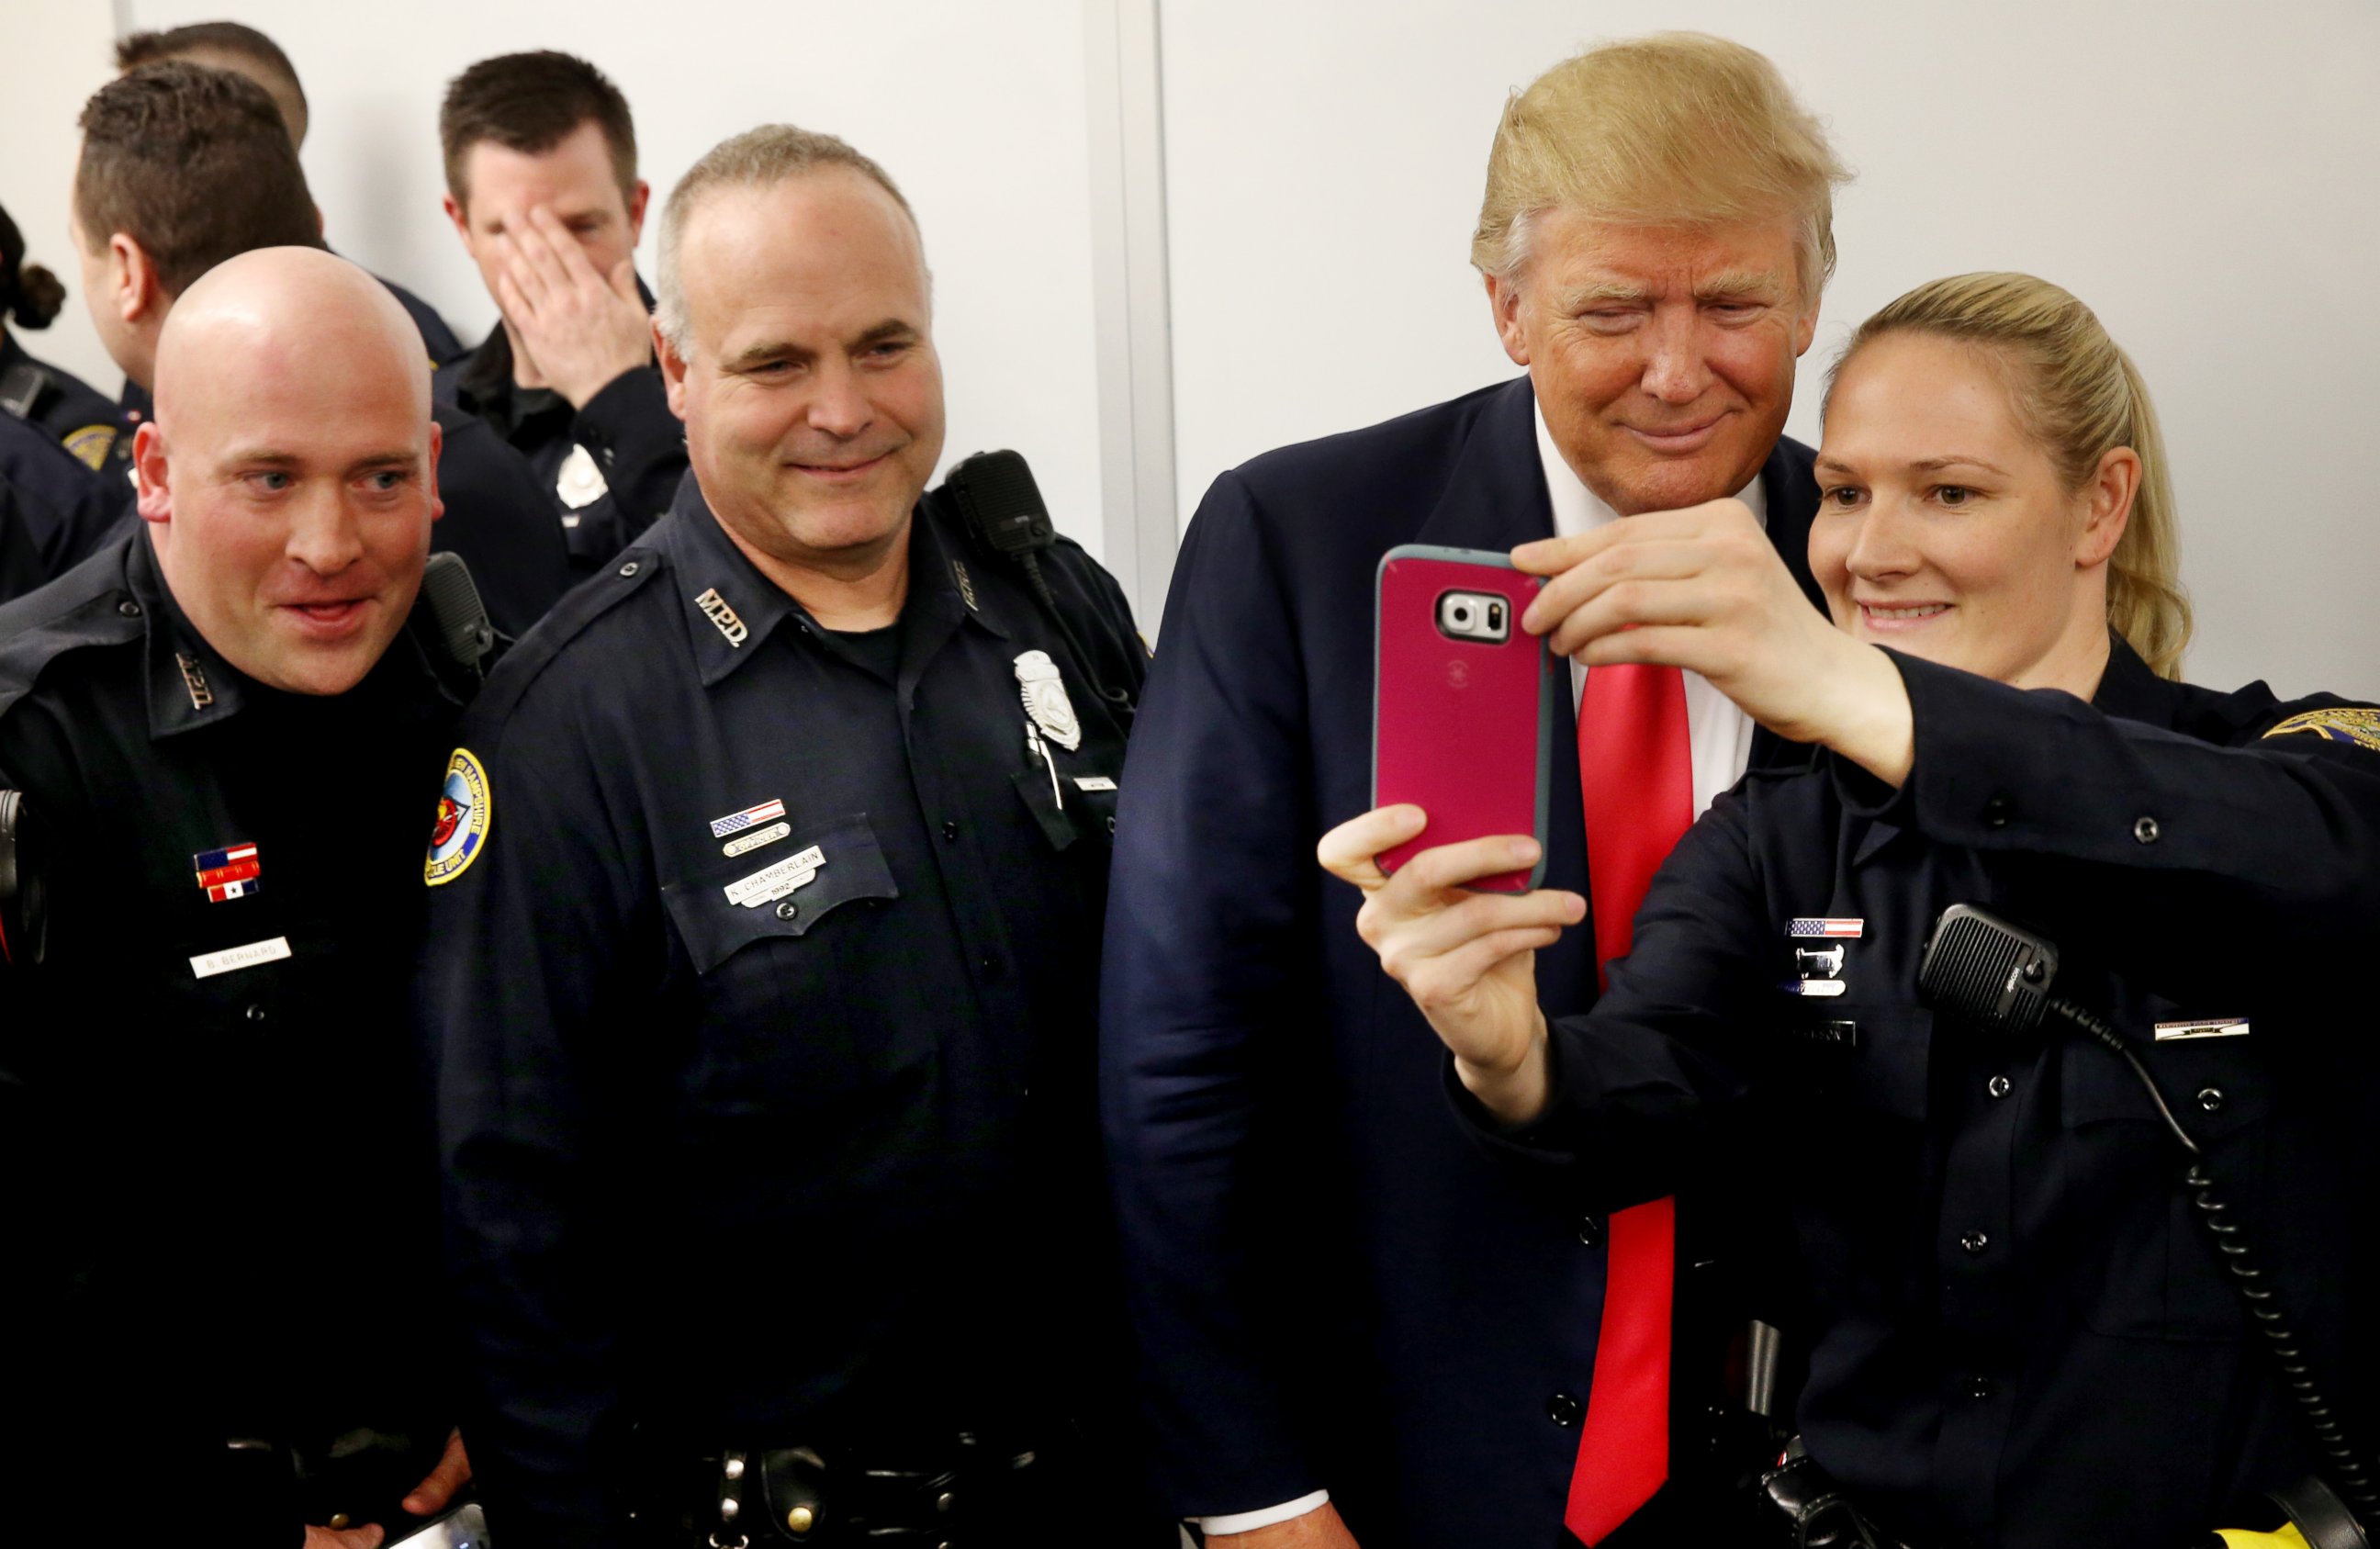 PHOTO: Officer Shannon Jackson, right, takes a selfie with Donald Trump while while the candidate visited the Manchester Police Department in Manchester, New Hampshire, on Feb. 4, 2016. 